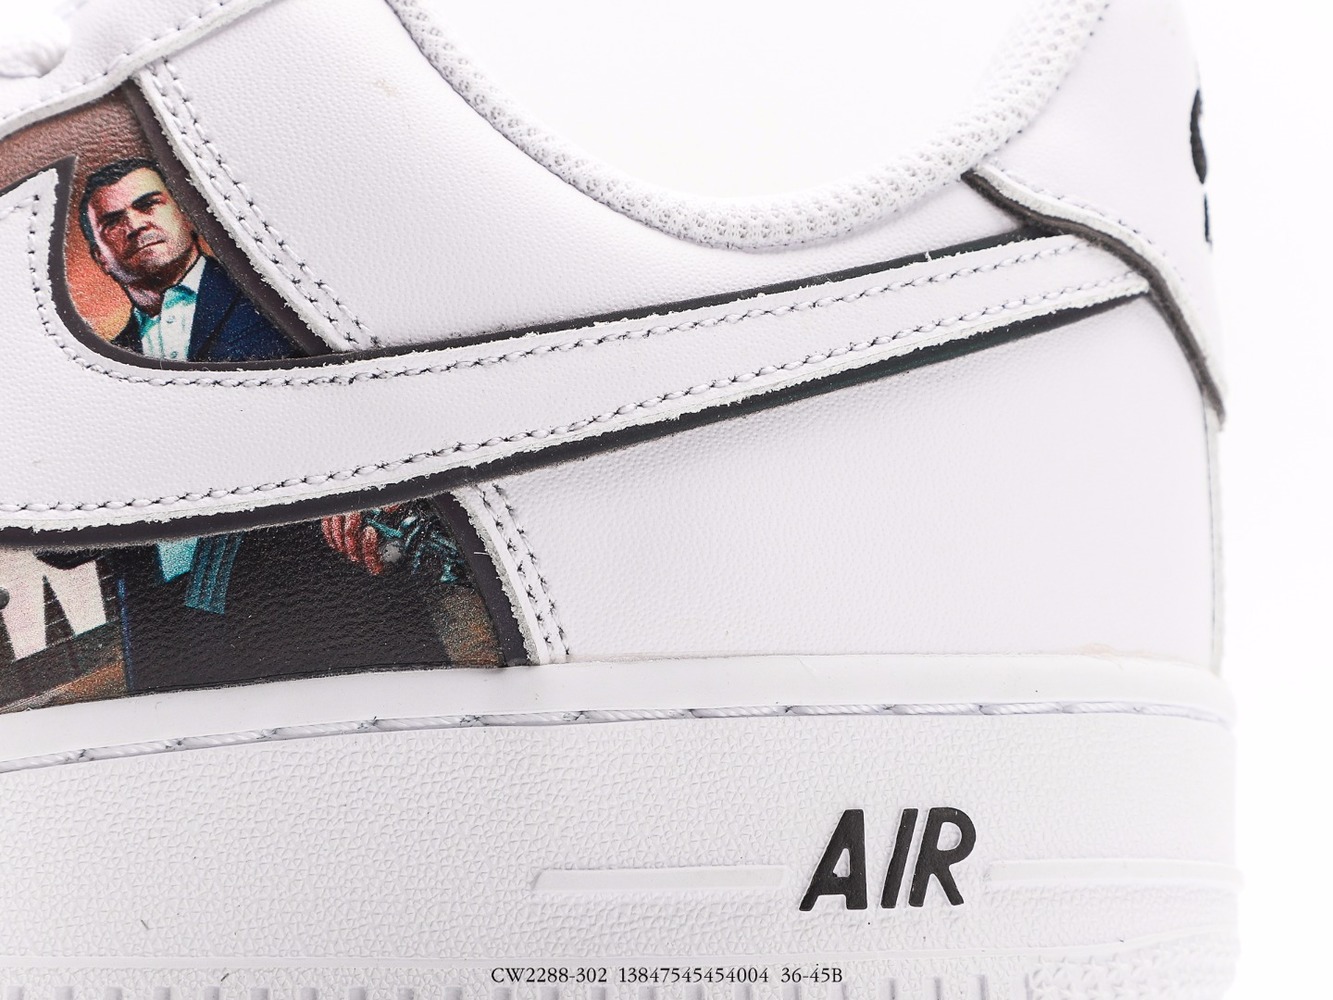 Grand Theft Auto x Nike Air Force 1 07 LV8